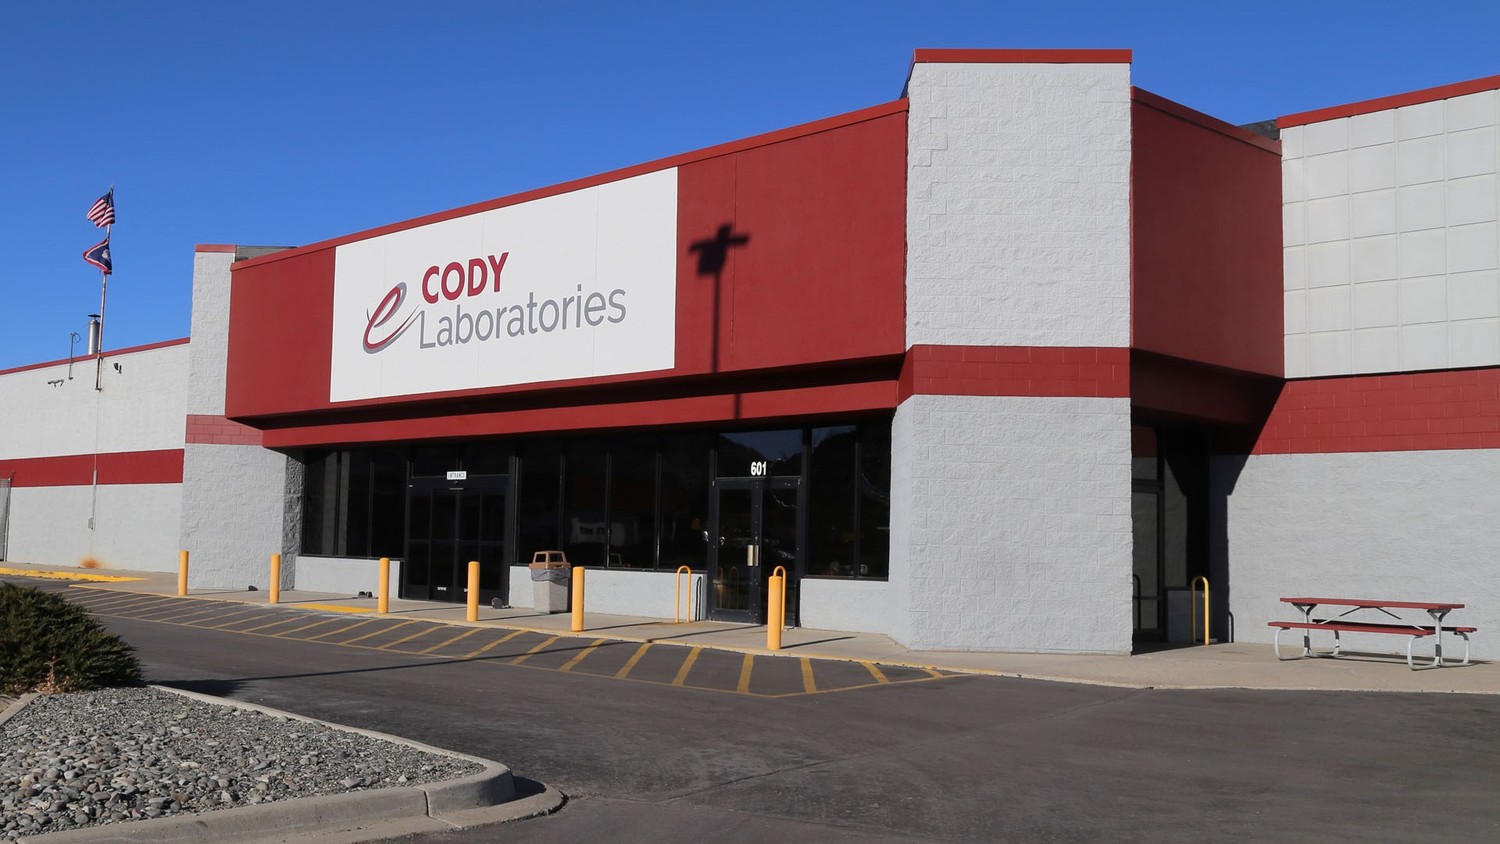 Cody Laboratories' owner, Lannett Company, announced Friday morning that it is eliminating 50 jobs in Cody to save costs.